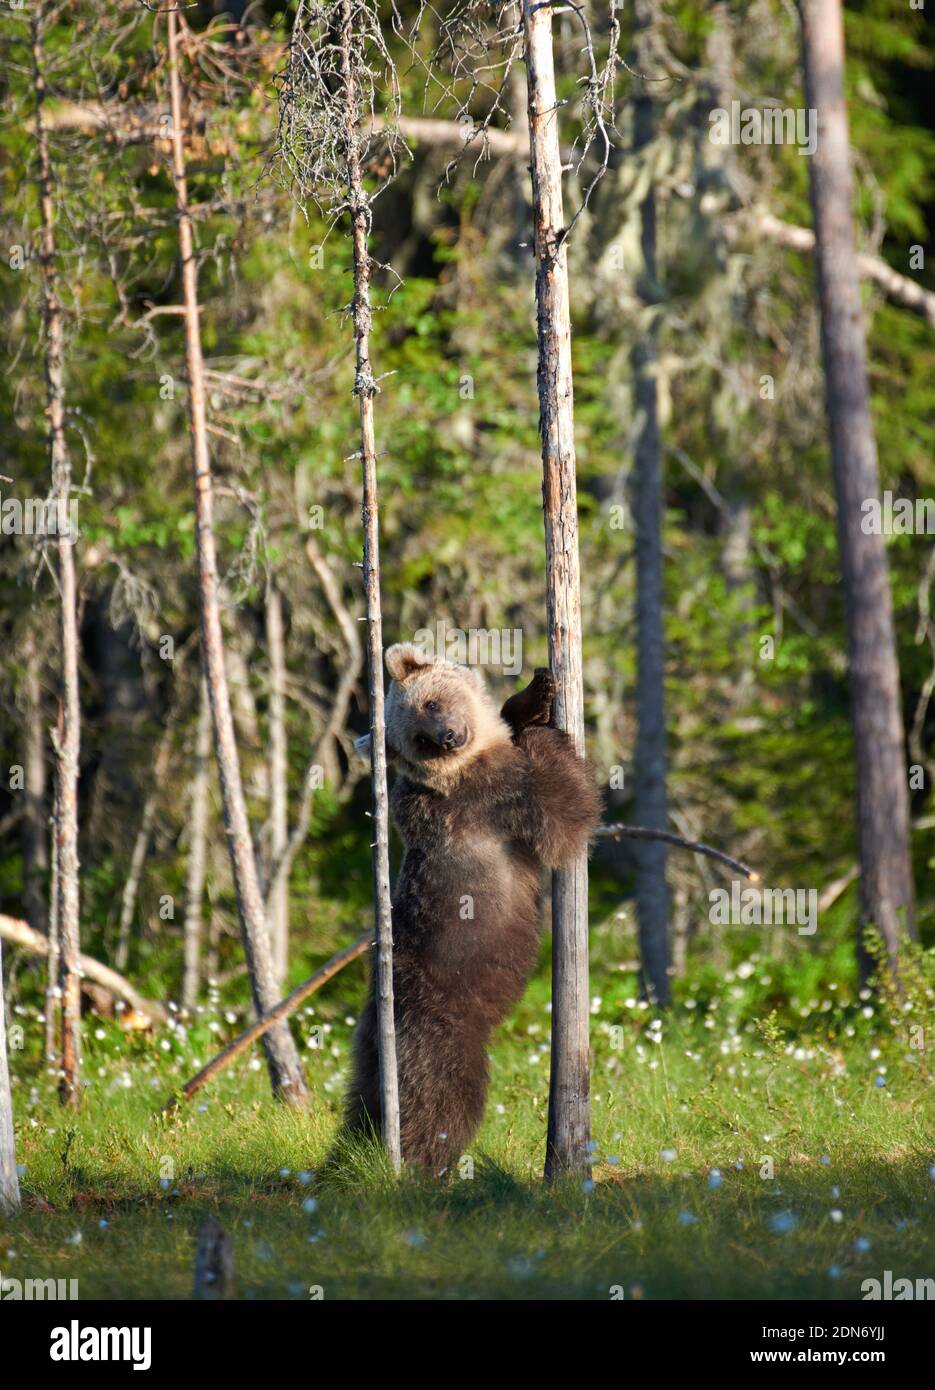 Young European brown bear (Ursus arctos) standing up and hugging a tree in swamp in North-Eastern Finland at the end of the June 2018. Stock Photo